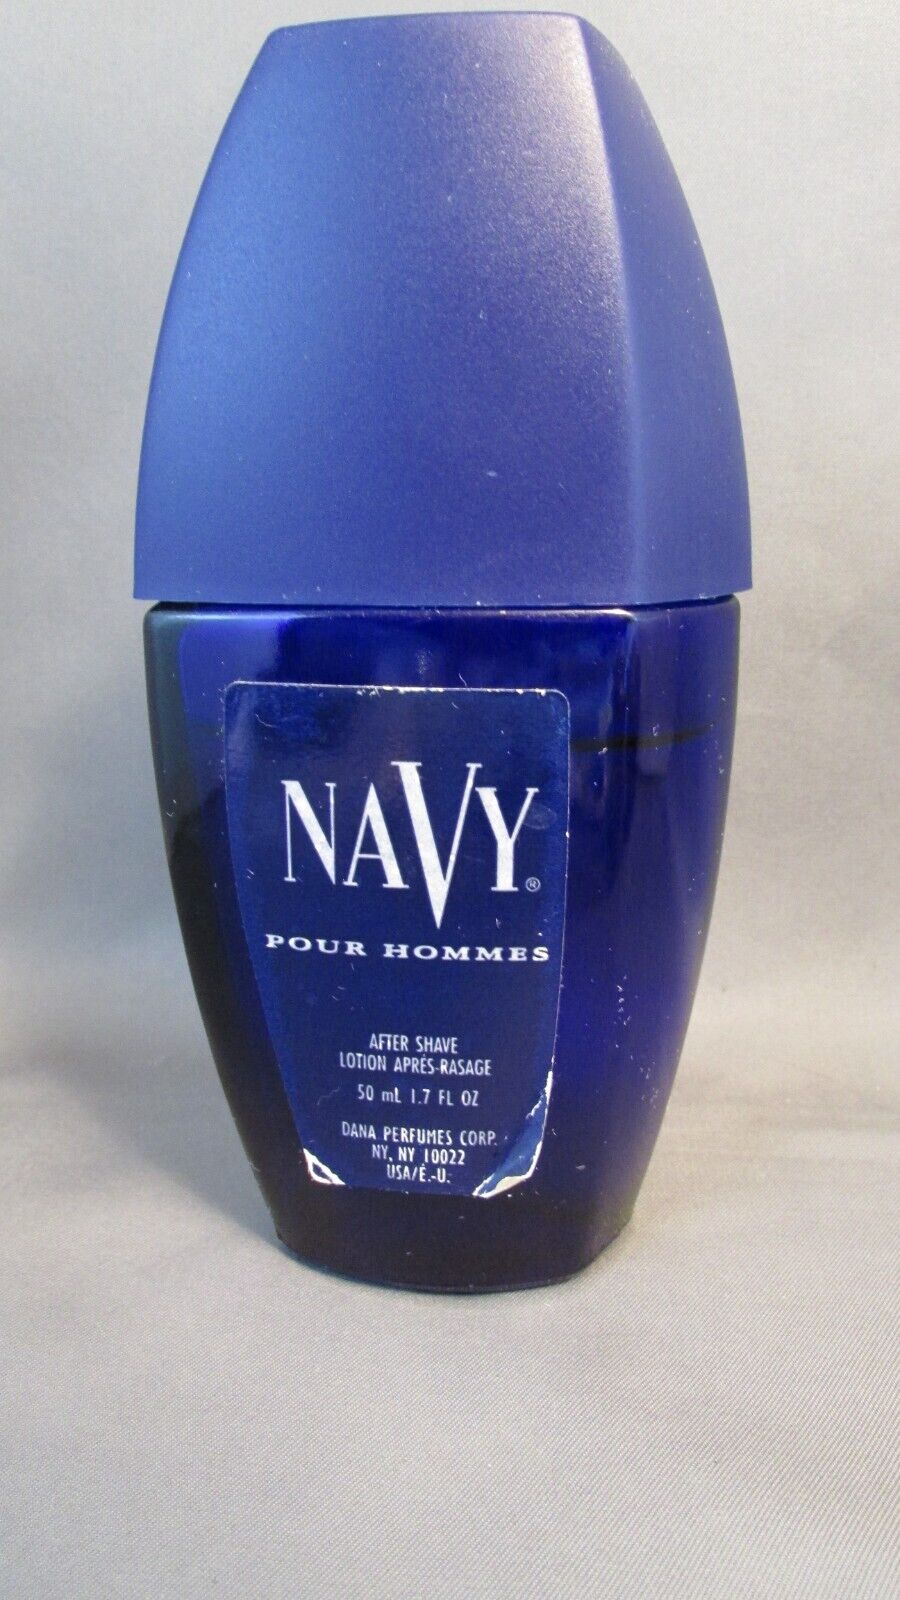 NAVY Pour Hommes 1.7 oz 50ml After Shave By Dana Perfumes Corp. Original Formula